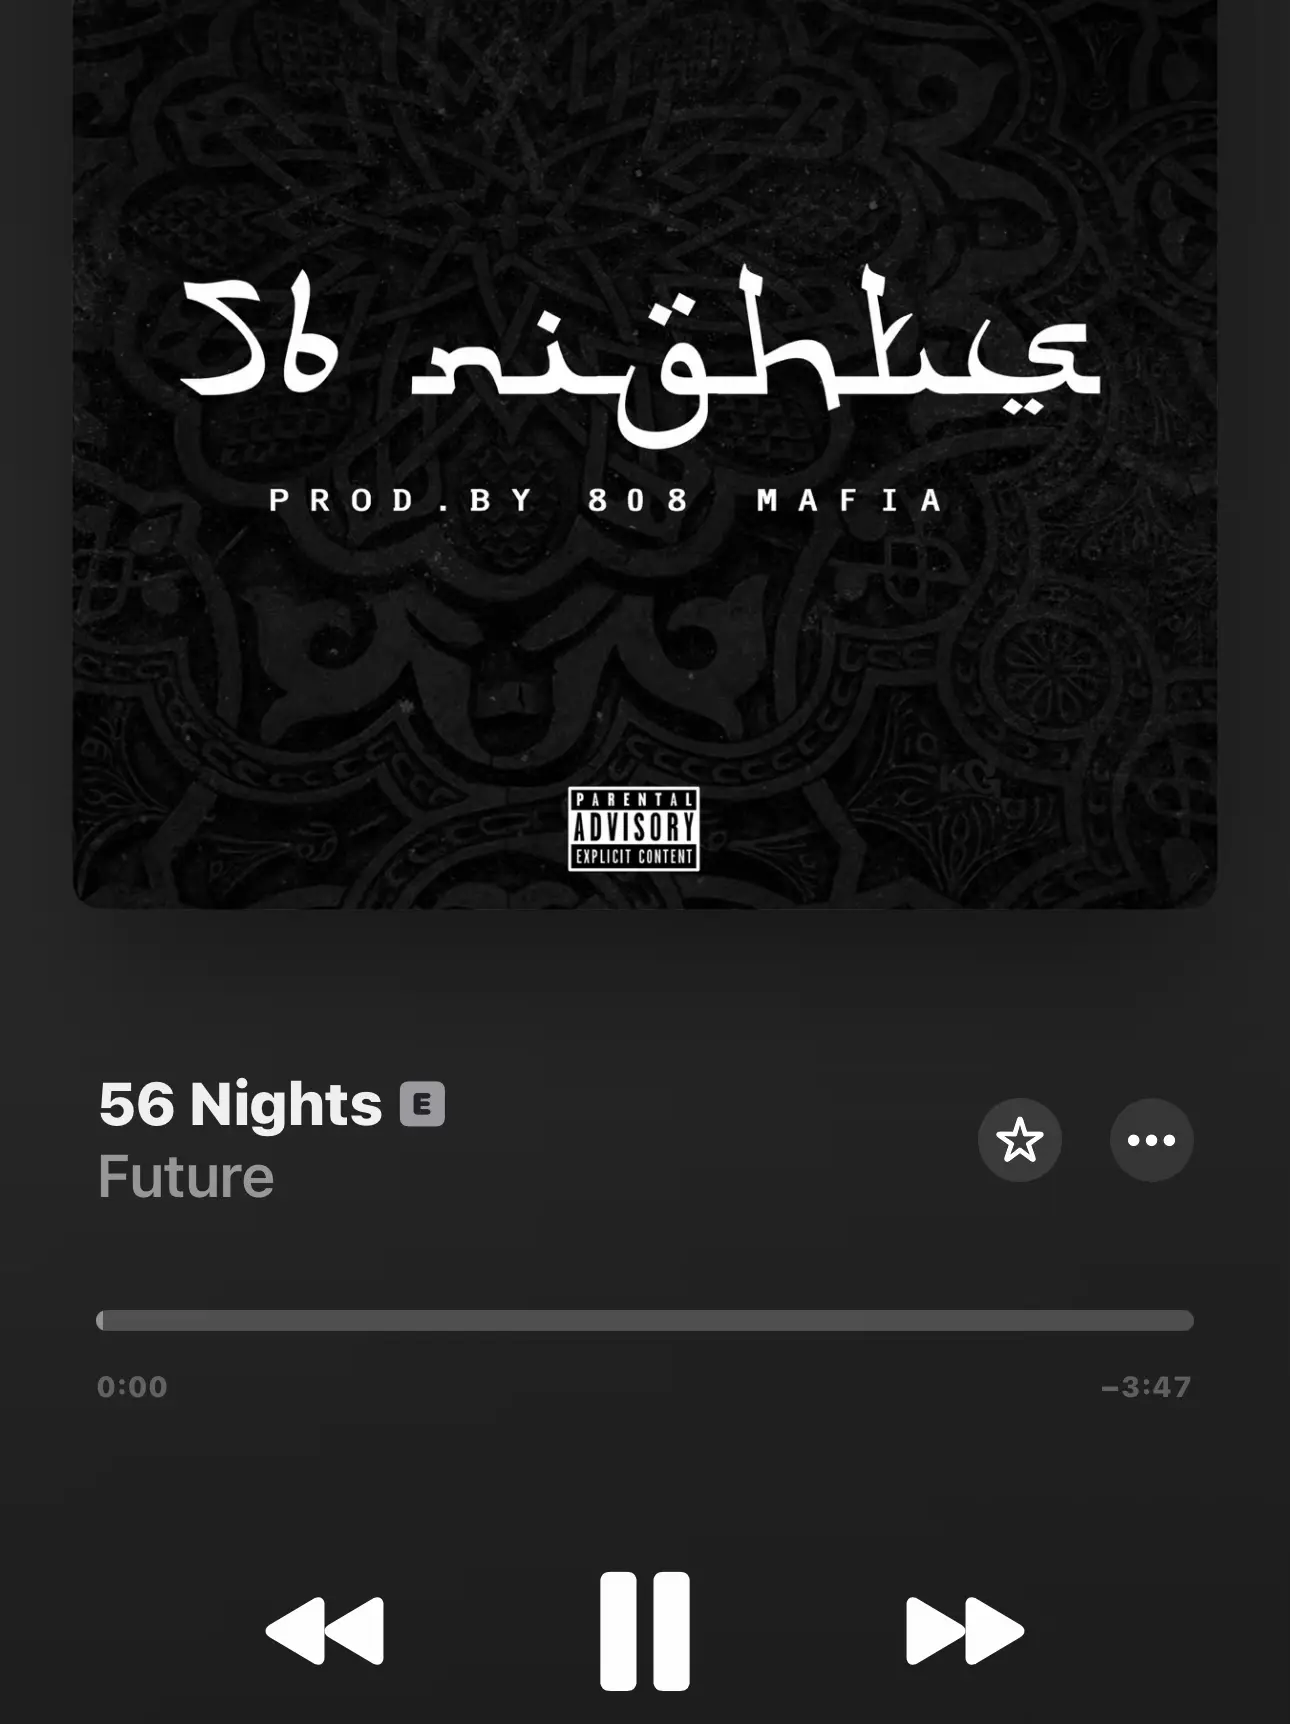  A song with a blue background and the words "6 Nights B" on it.